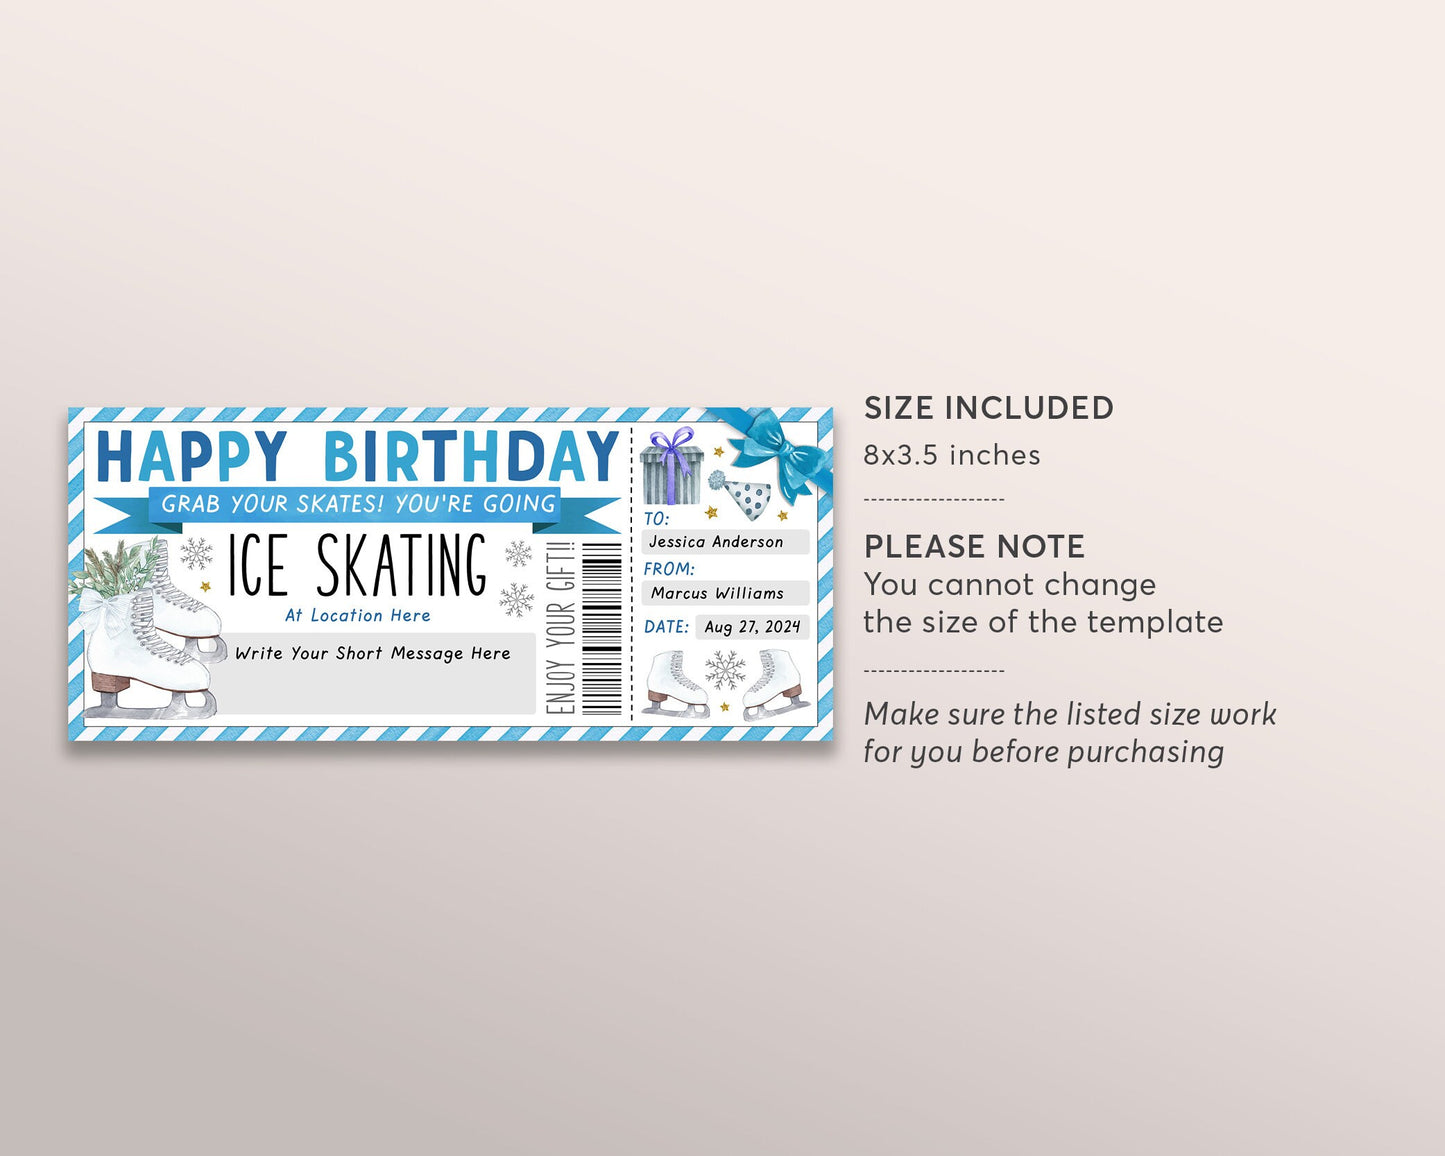 Ice Skating Gift Voucher Editable Template, Birthday Surprise Skating Lessons Gift Certificate For Teen, Skating Membership Coupon Printable